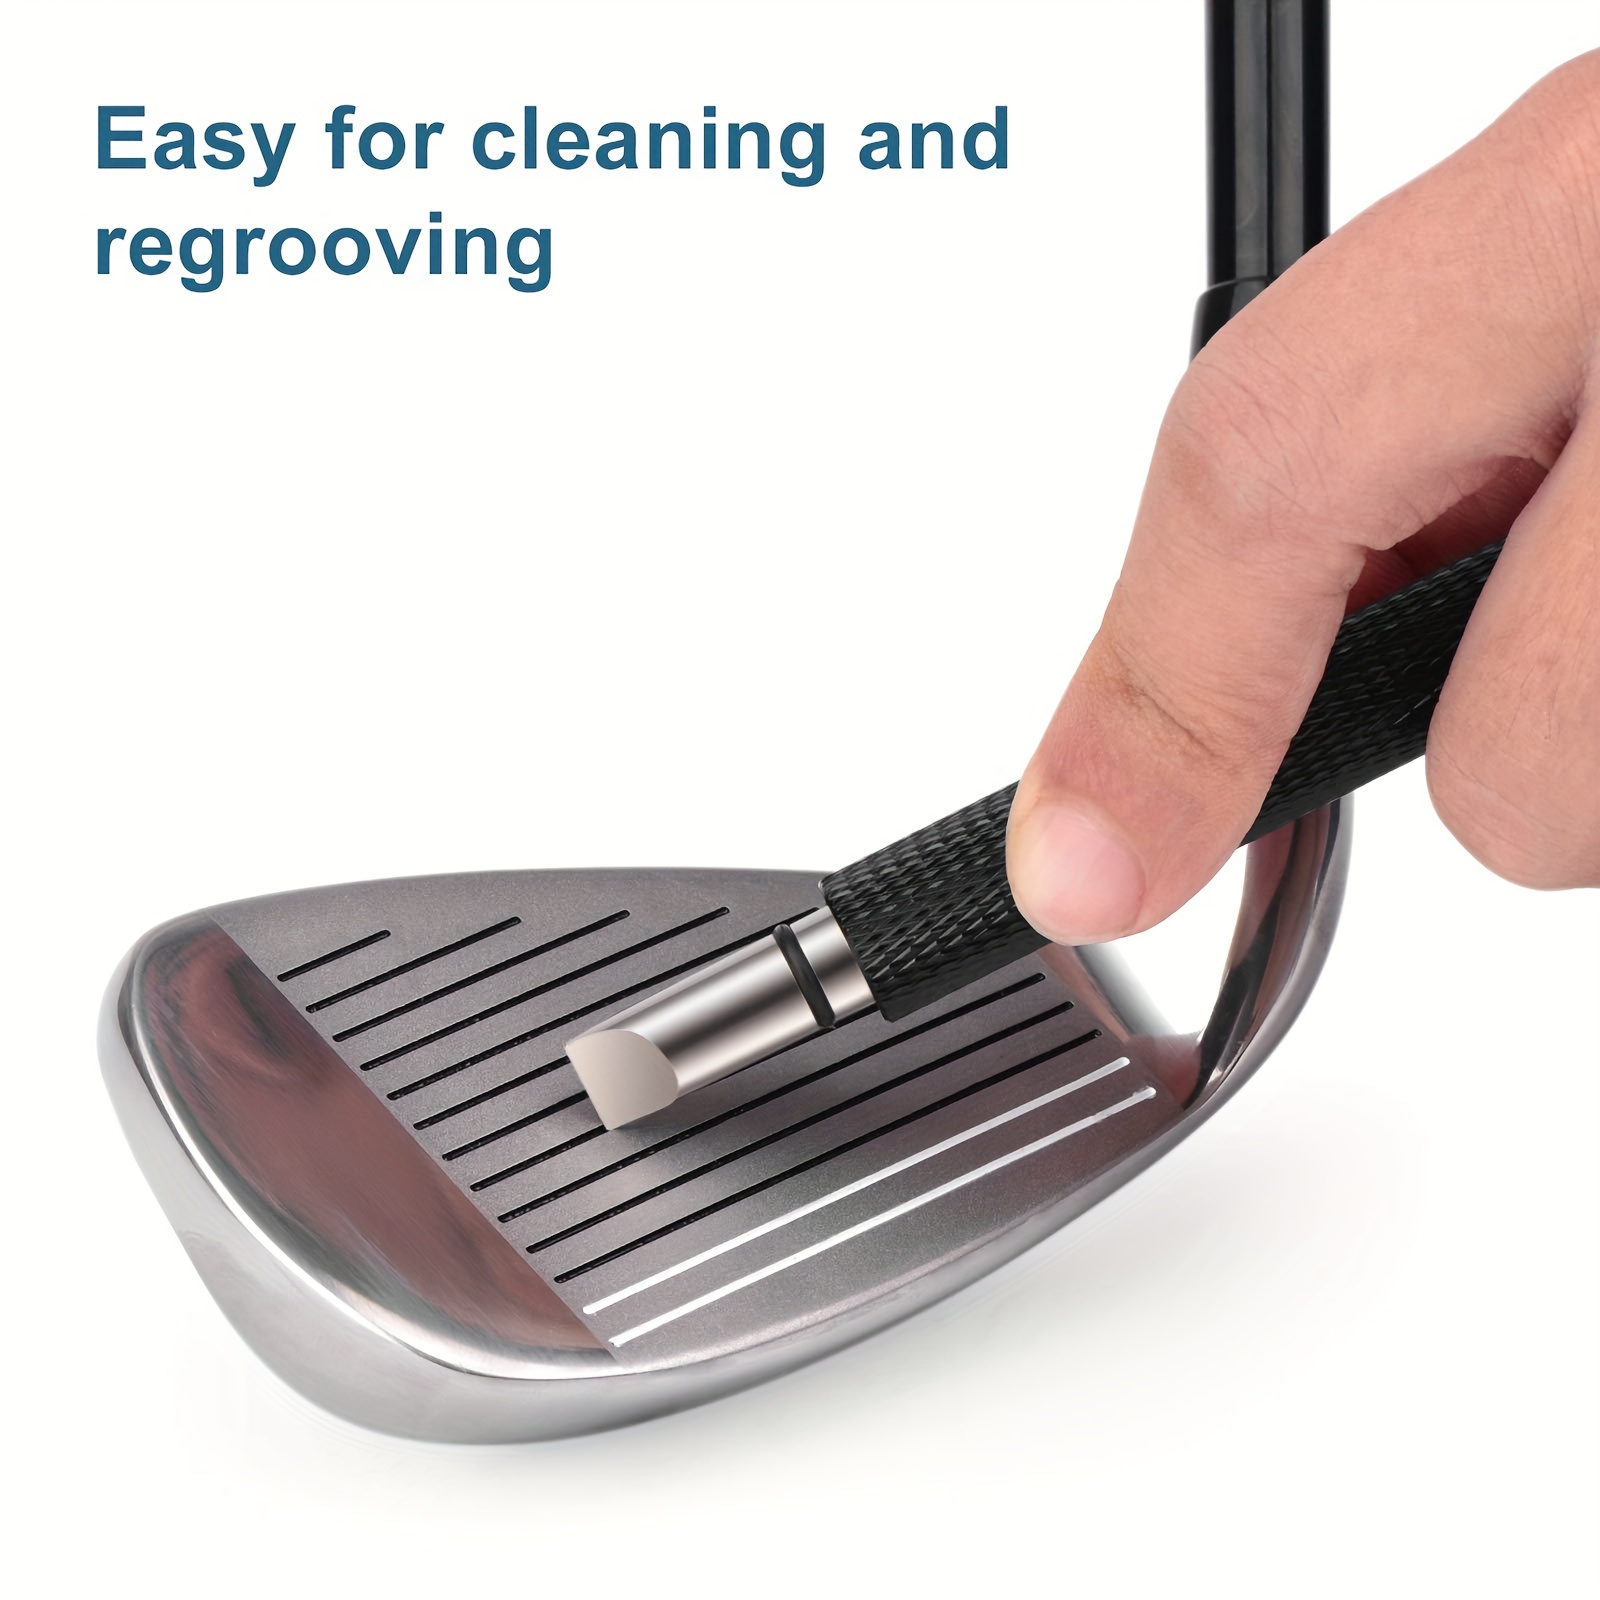 Golf Club Groove Sharpener, Re-Grooving Tool and Cleaner for Wedges & Irons  